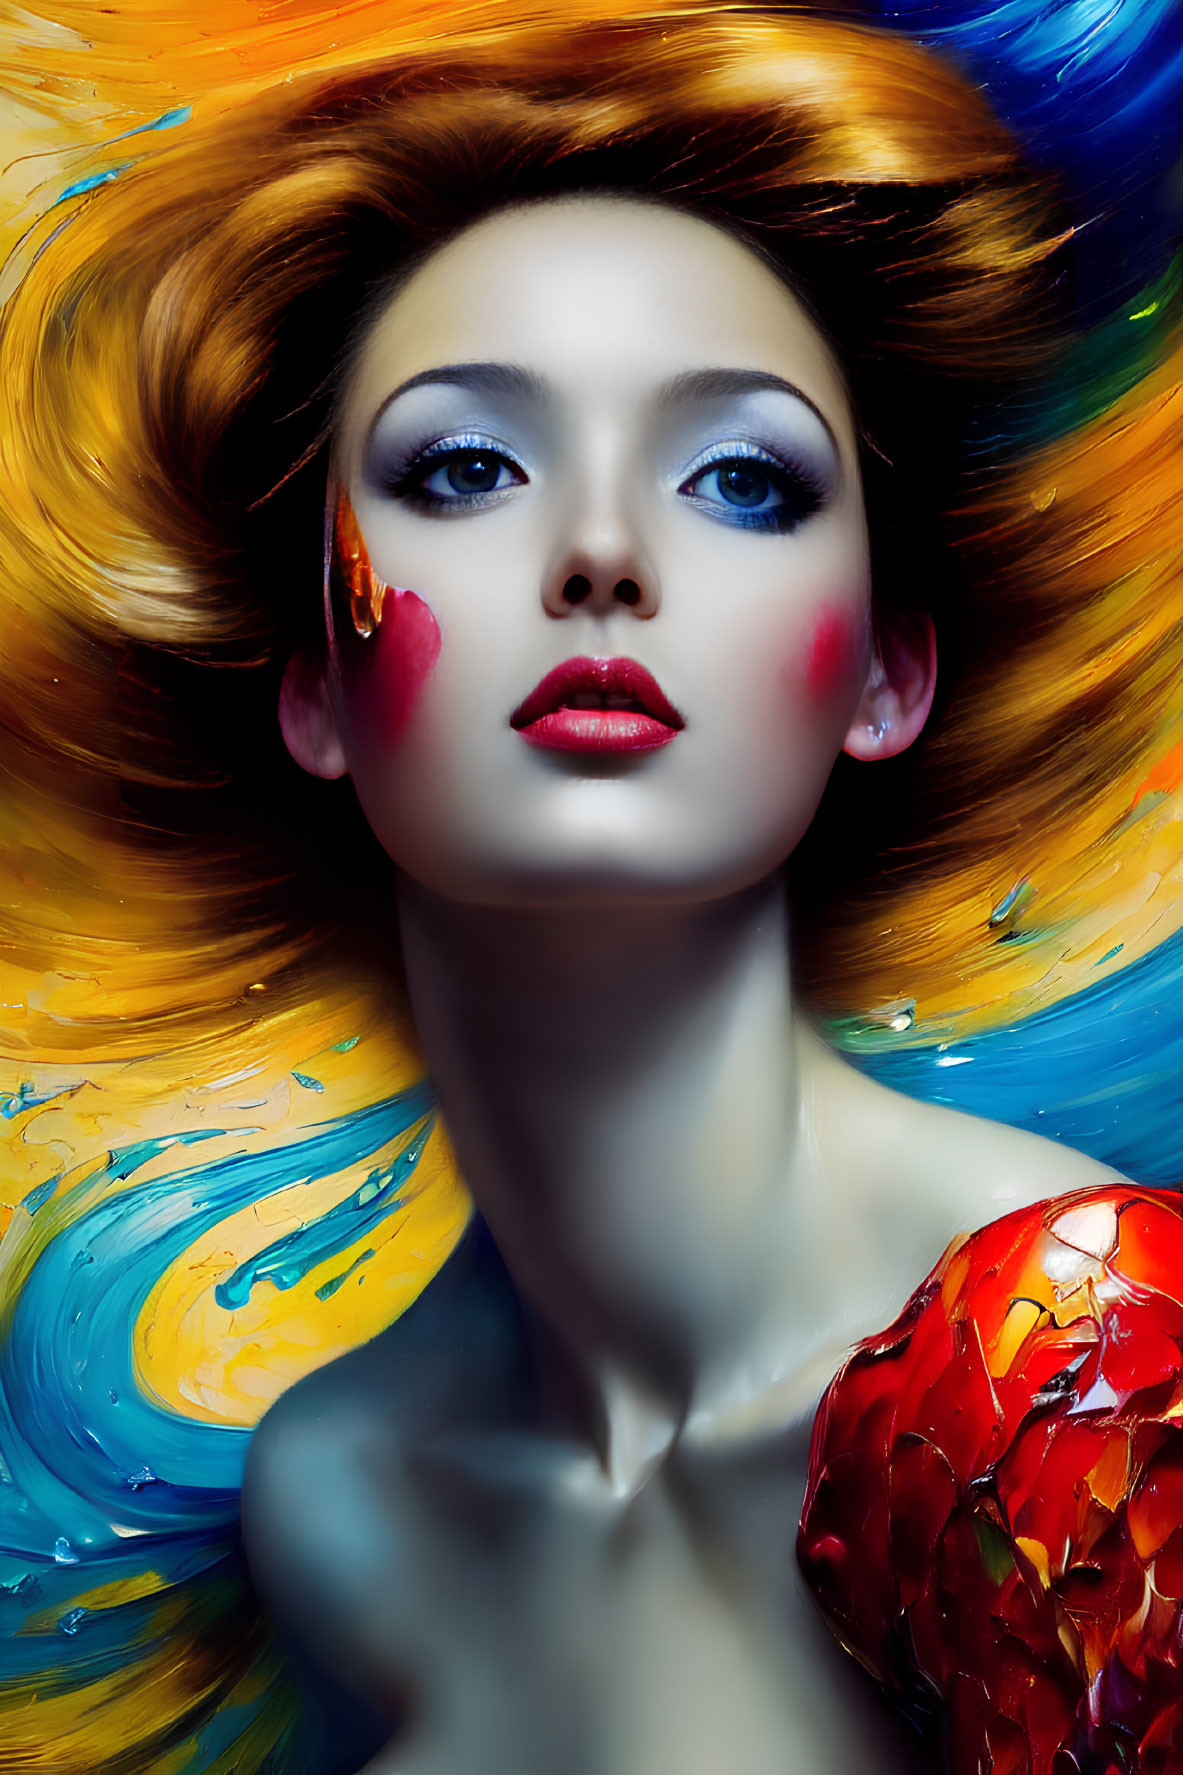 Colorful Woman with Swirling Hair and Vivid Makeup in Vibrant Surroundings